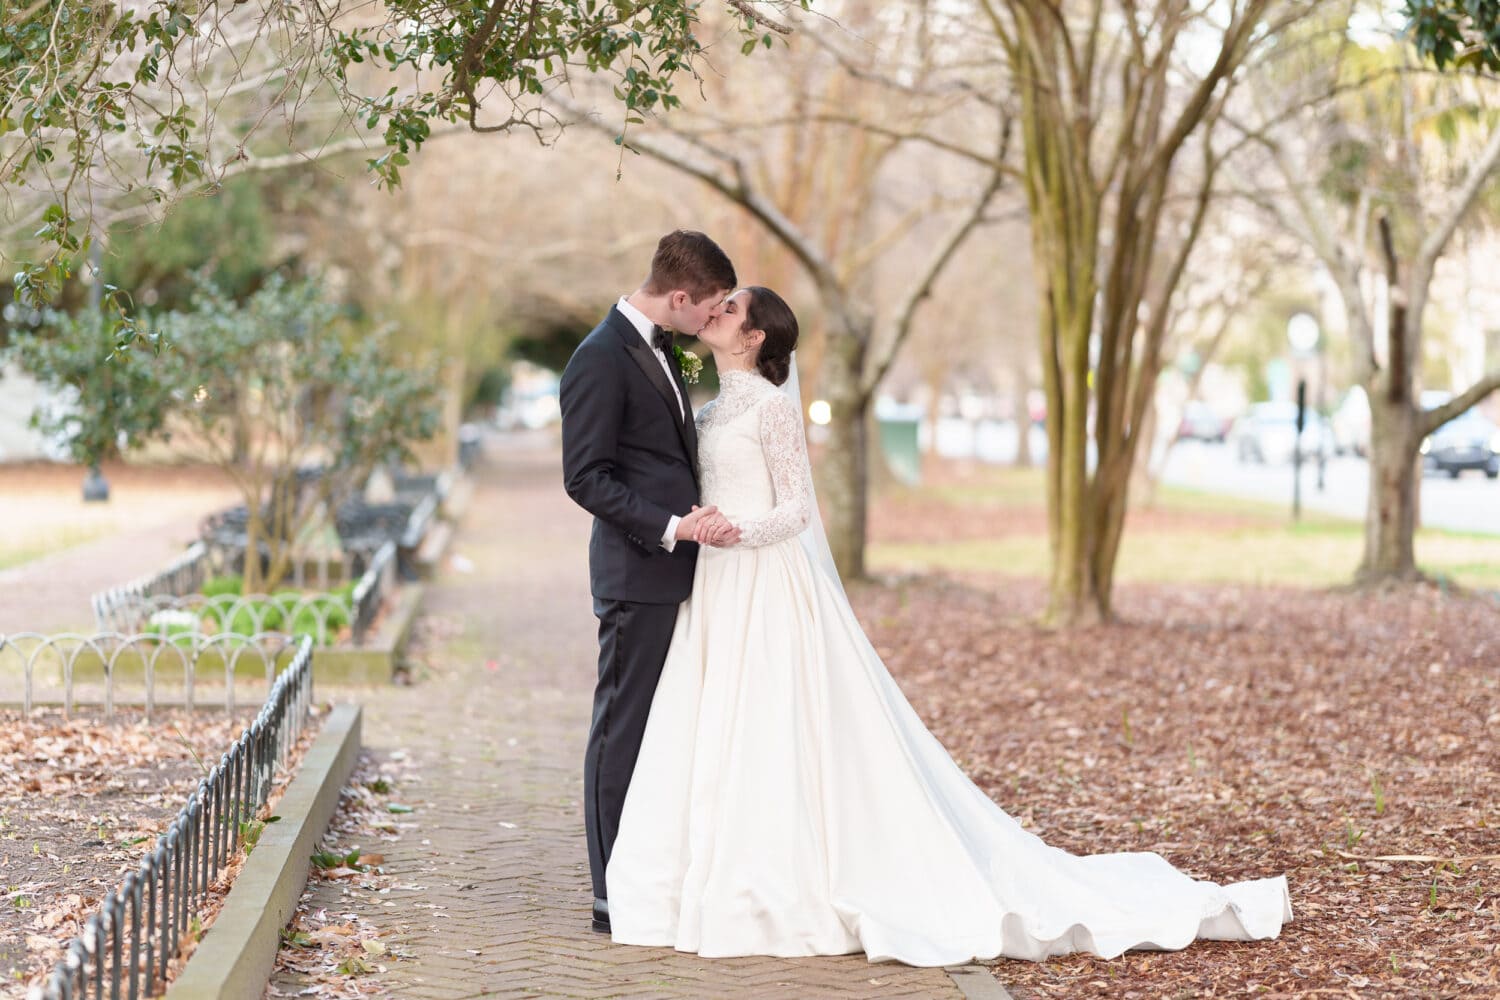 Bride and groom on the walkway in the park - Marion Square Charleston